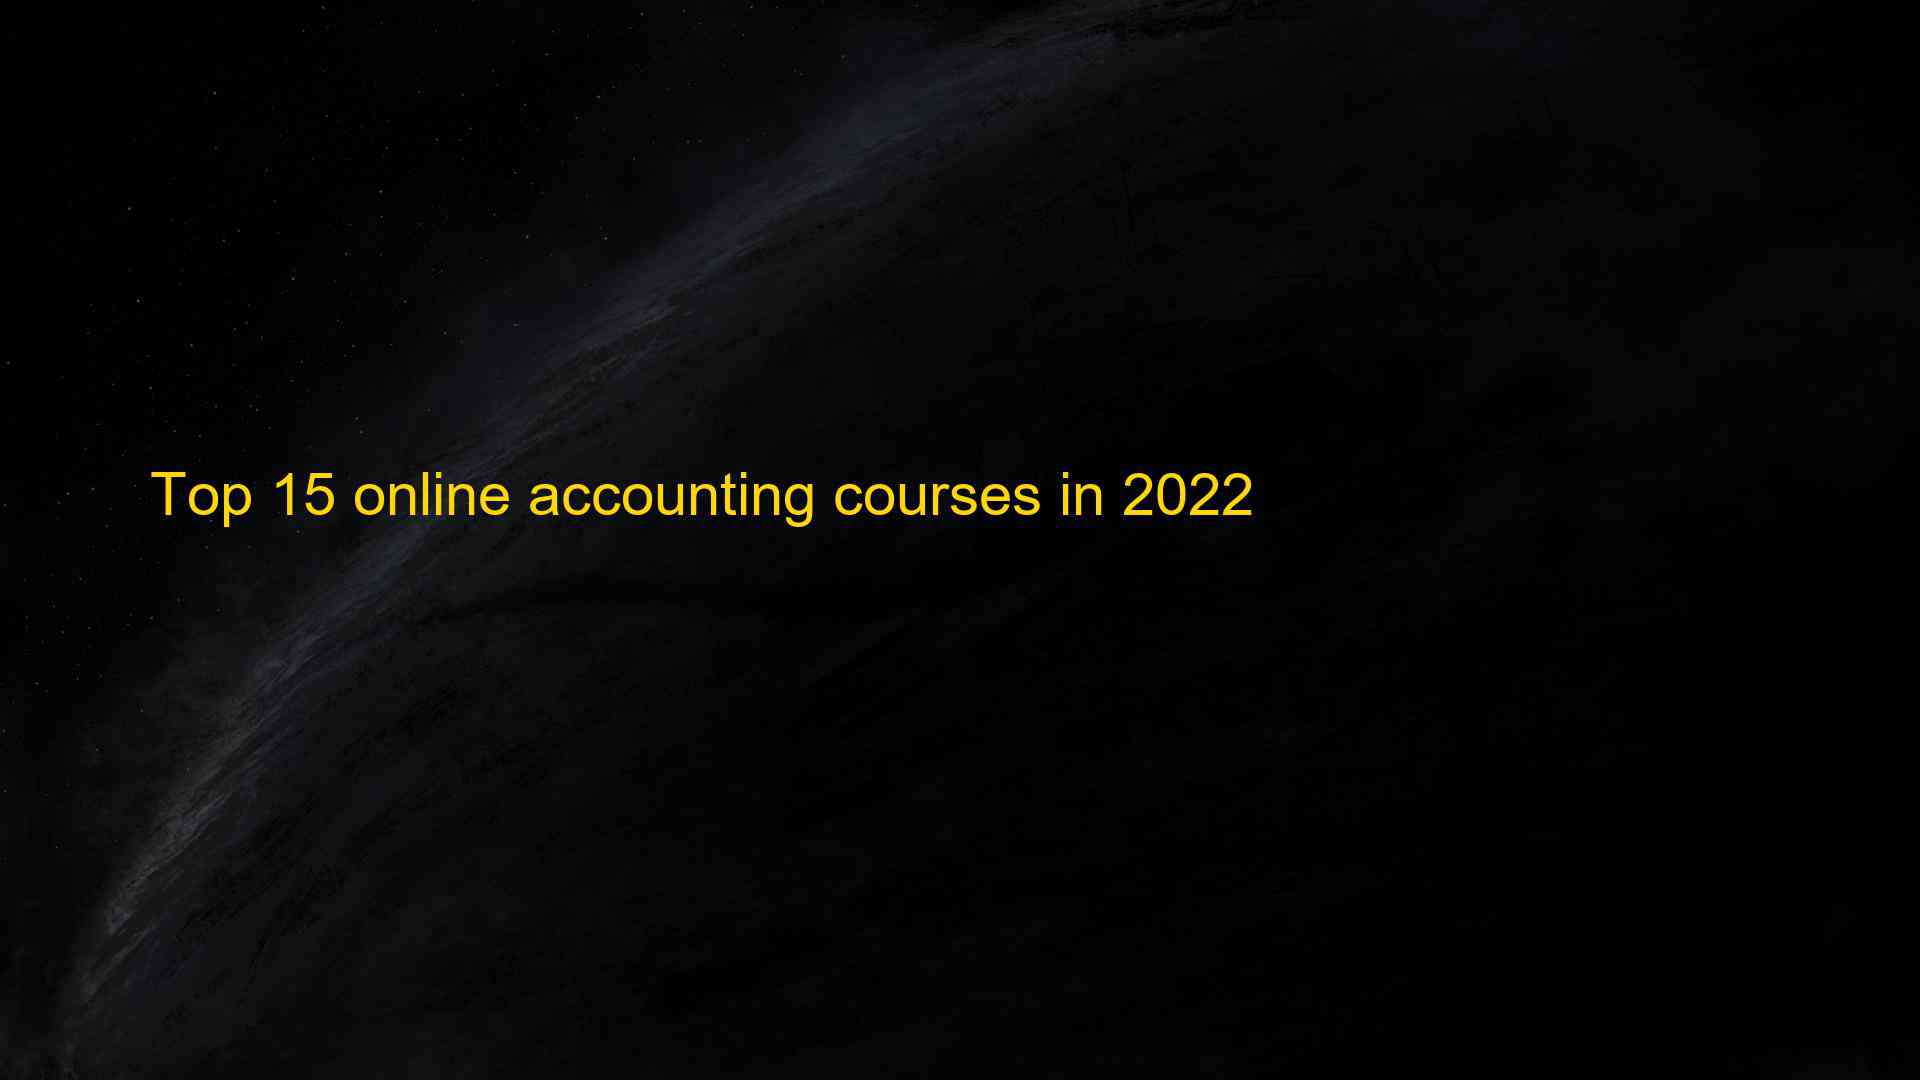 Top 15 online accounting courses in 2022 1660721701